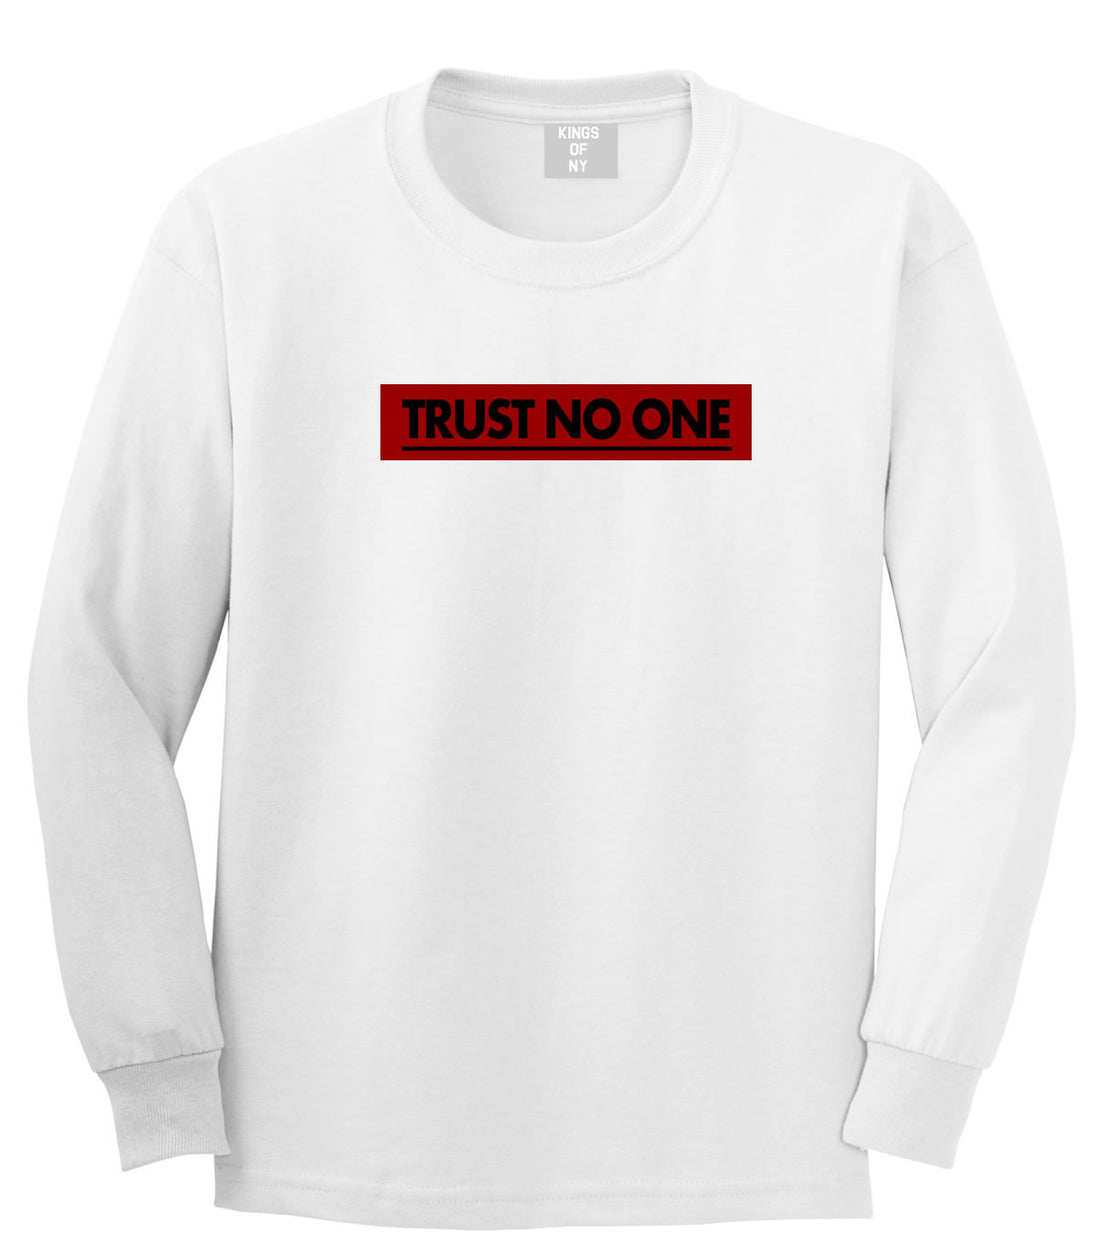 Trust No One Long Sleeve T-Shirt in White By Kings Of NY